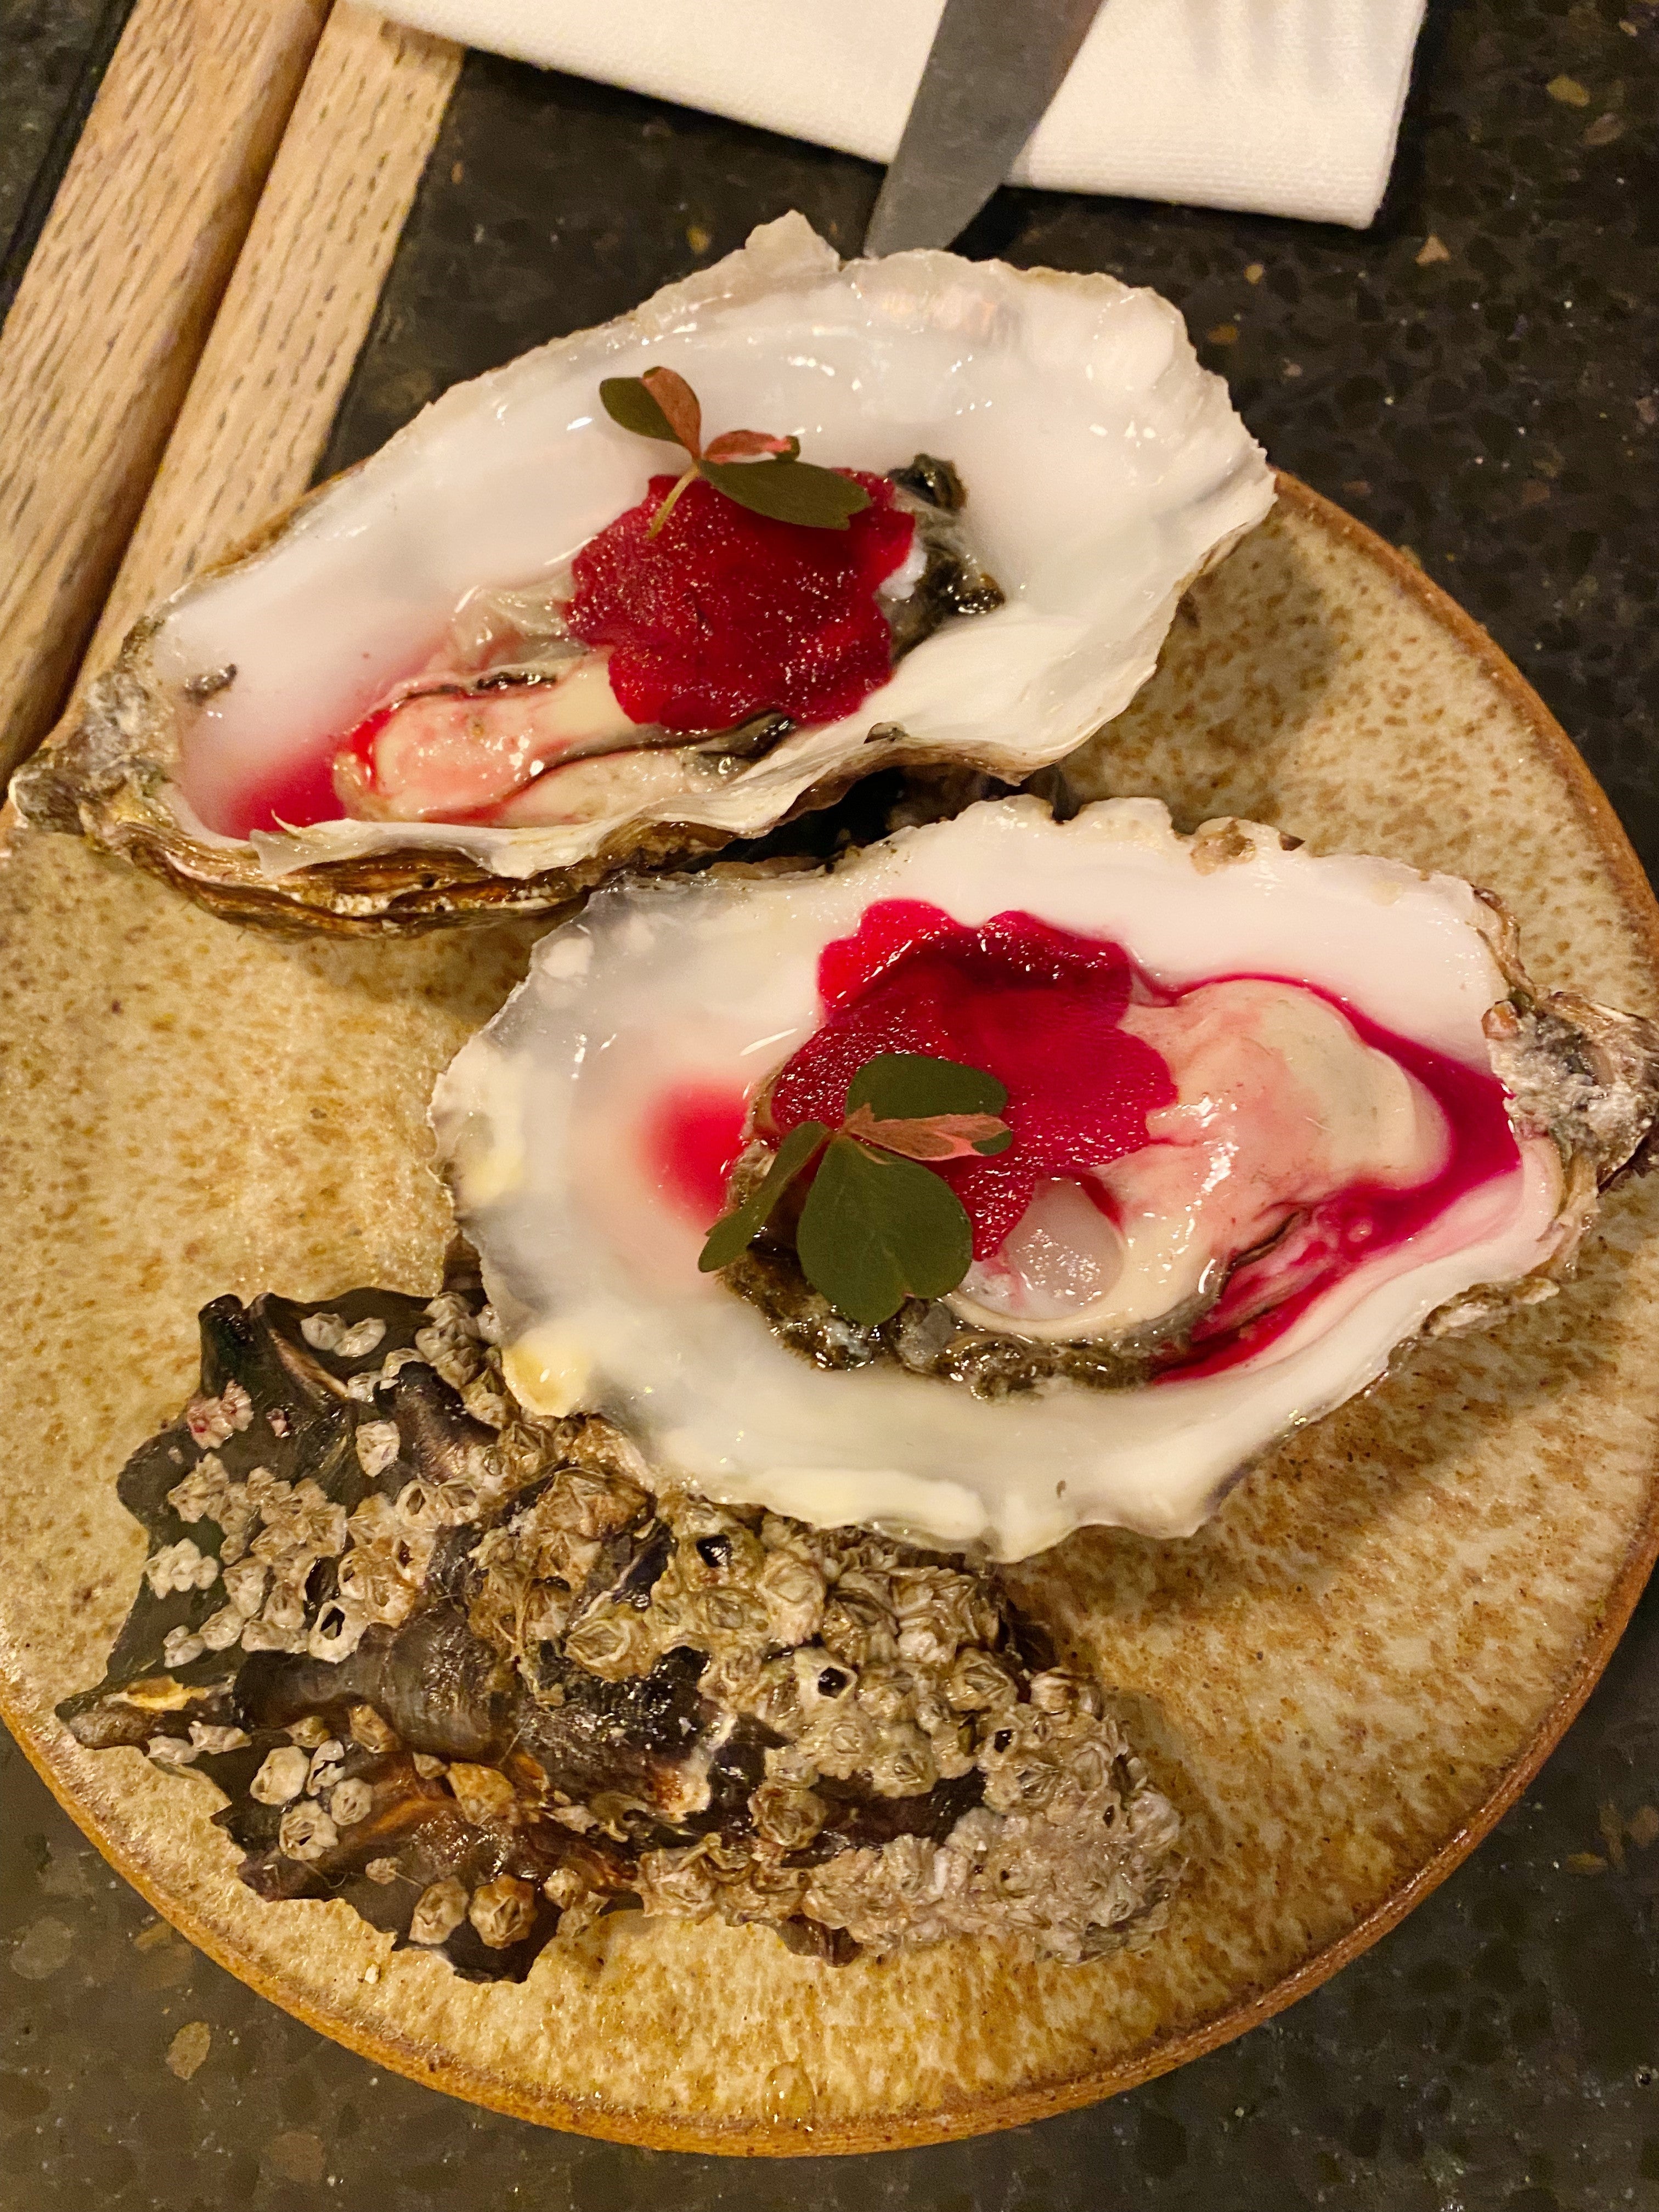 Carlingford oysters with a beetroot reduction and sorrel